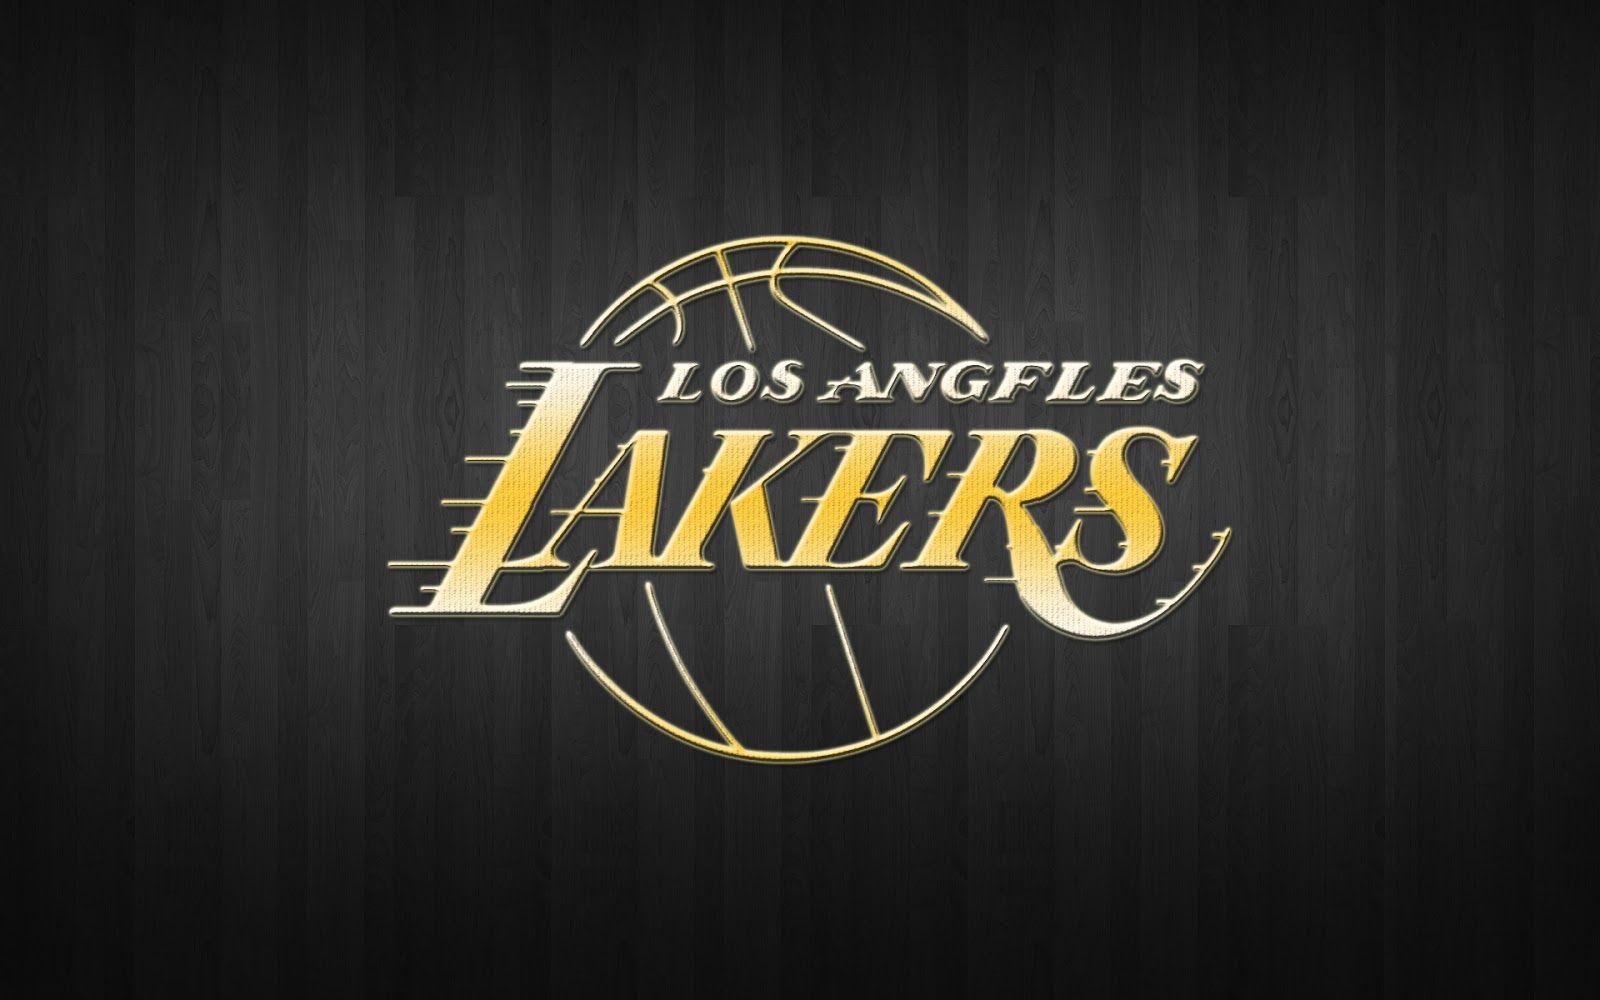 Wallpapers for the lakers